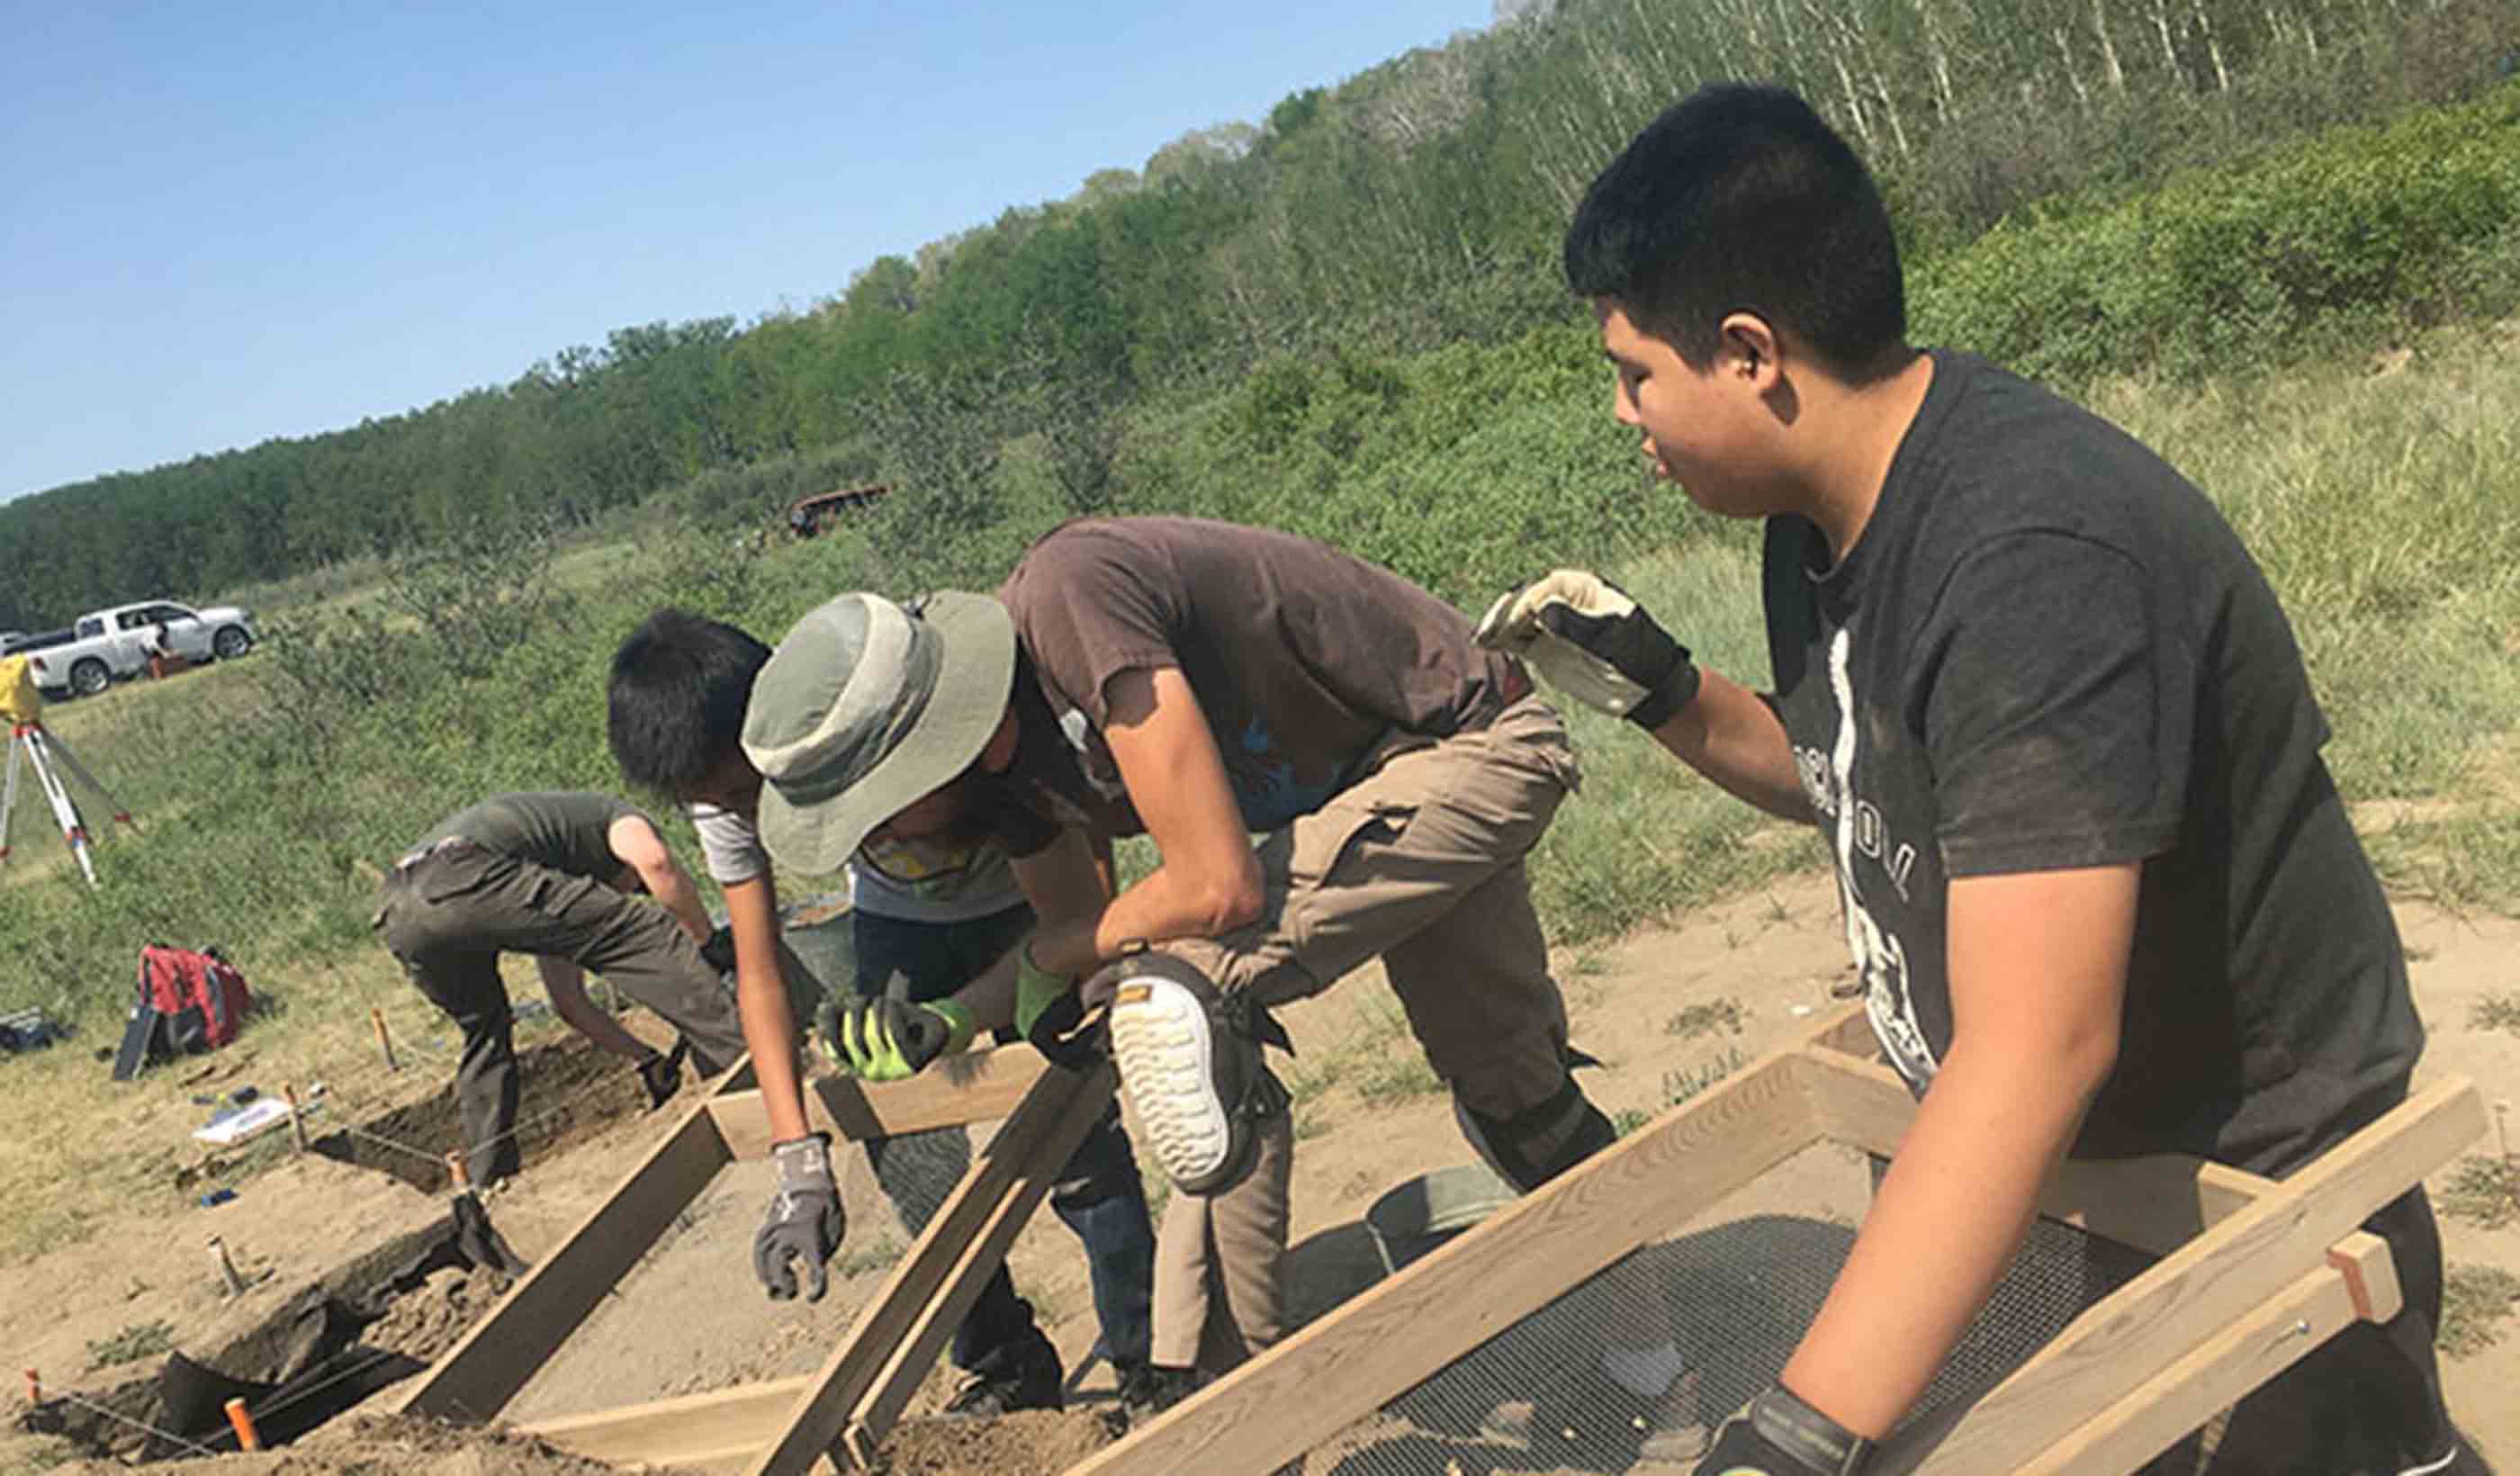 Helping Indigenous youth uncover history and discover career possibilities